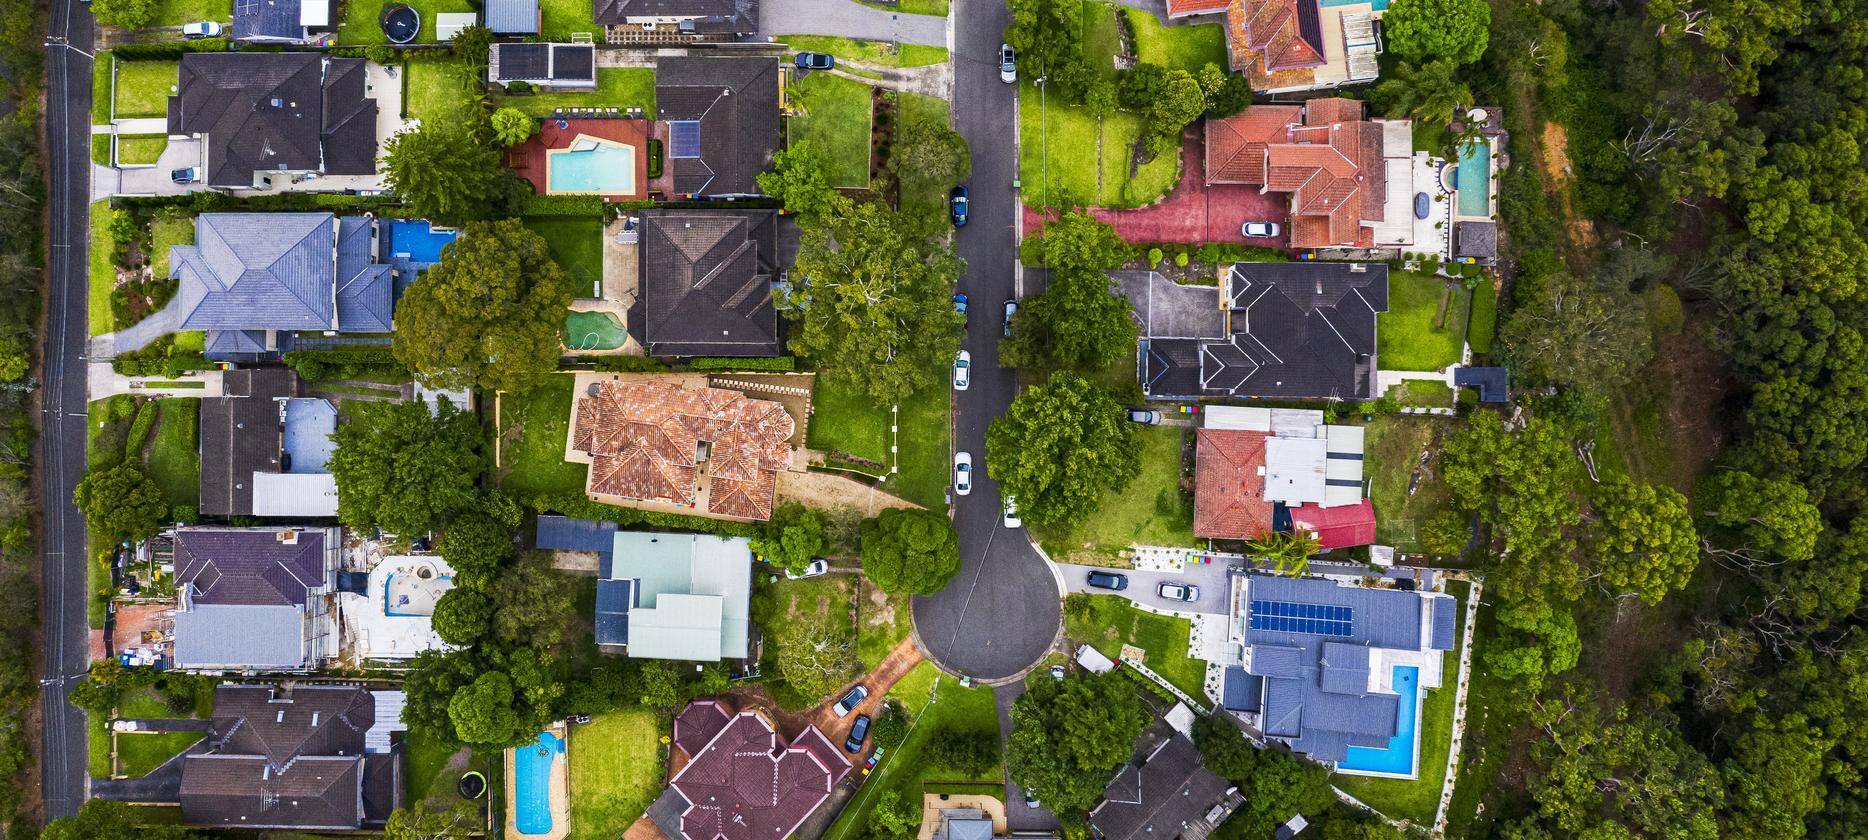 Melbourne and Sydney suburbs lead housing value declines